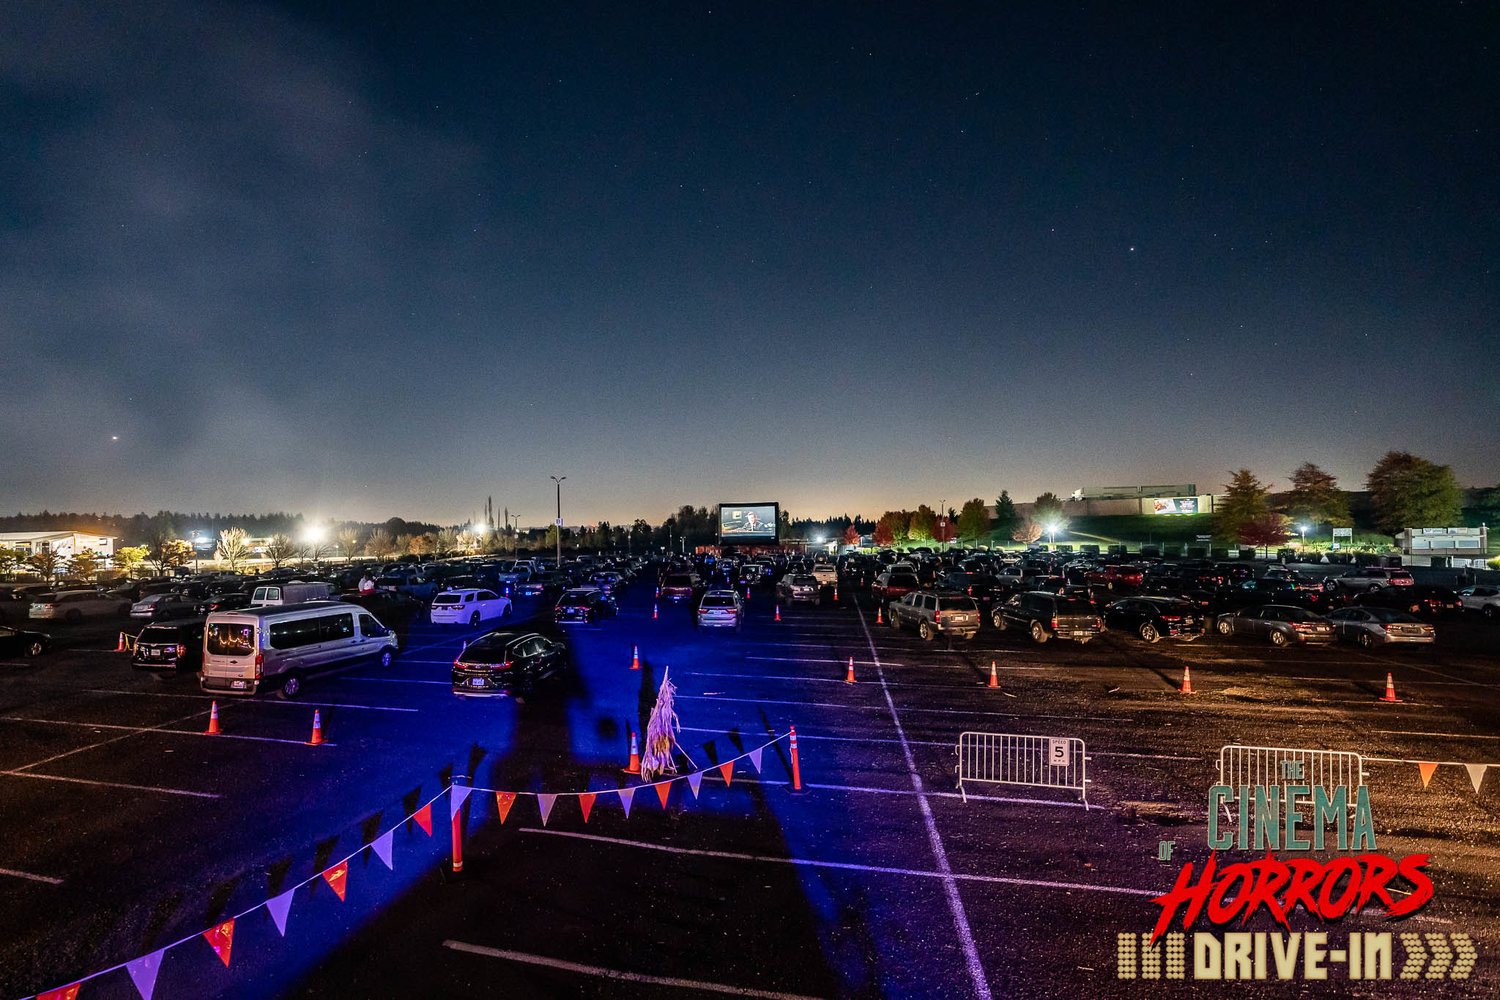 The parking lot of the Cinema of Horrors event in 2020 is pictured.